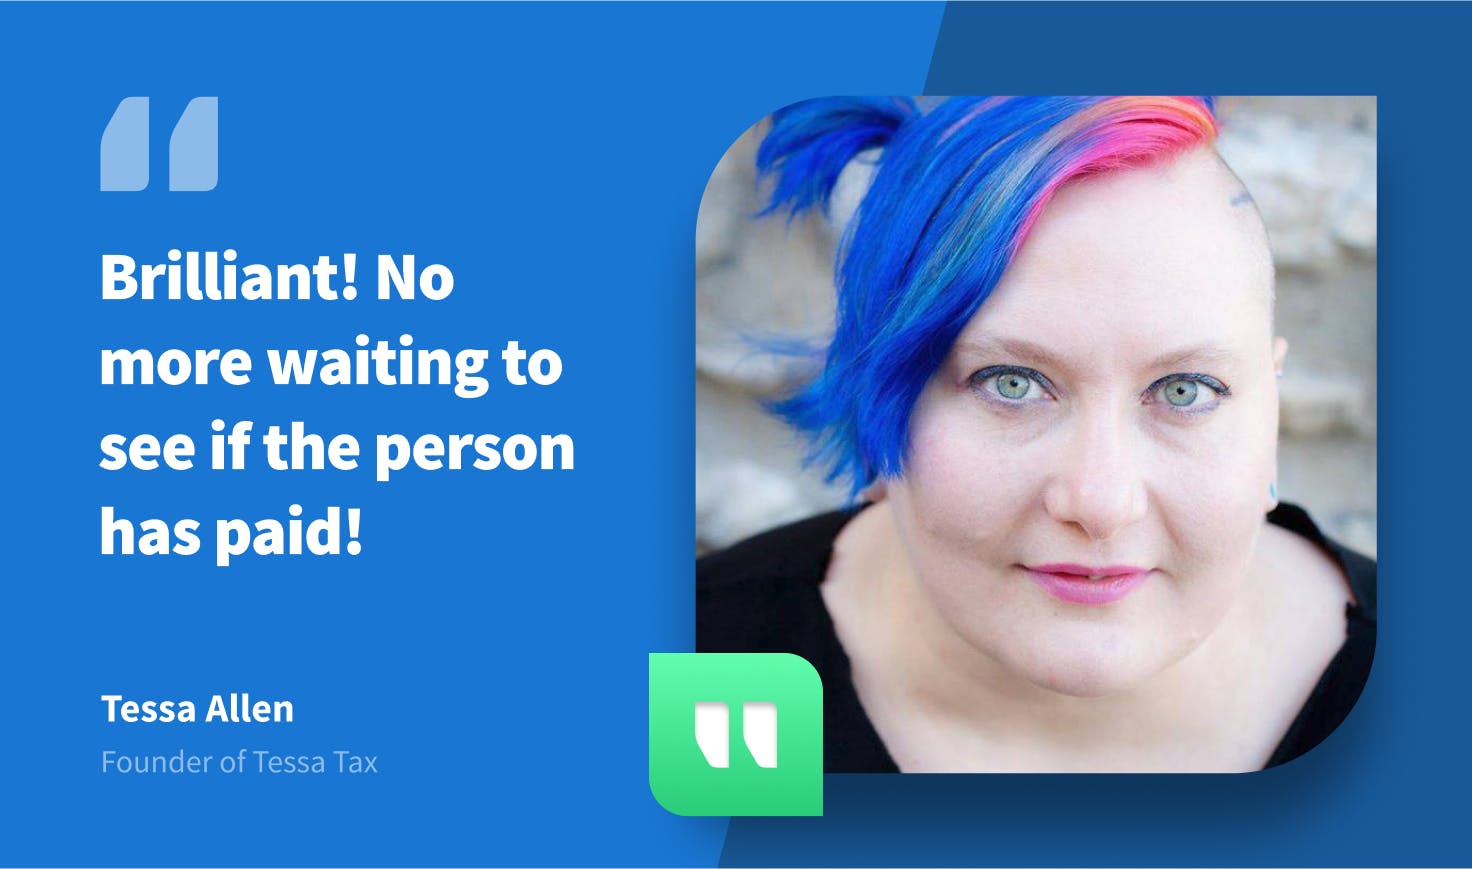 Why TaxDome is “Brilliant” According to Tessa Tax